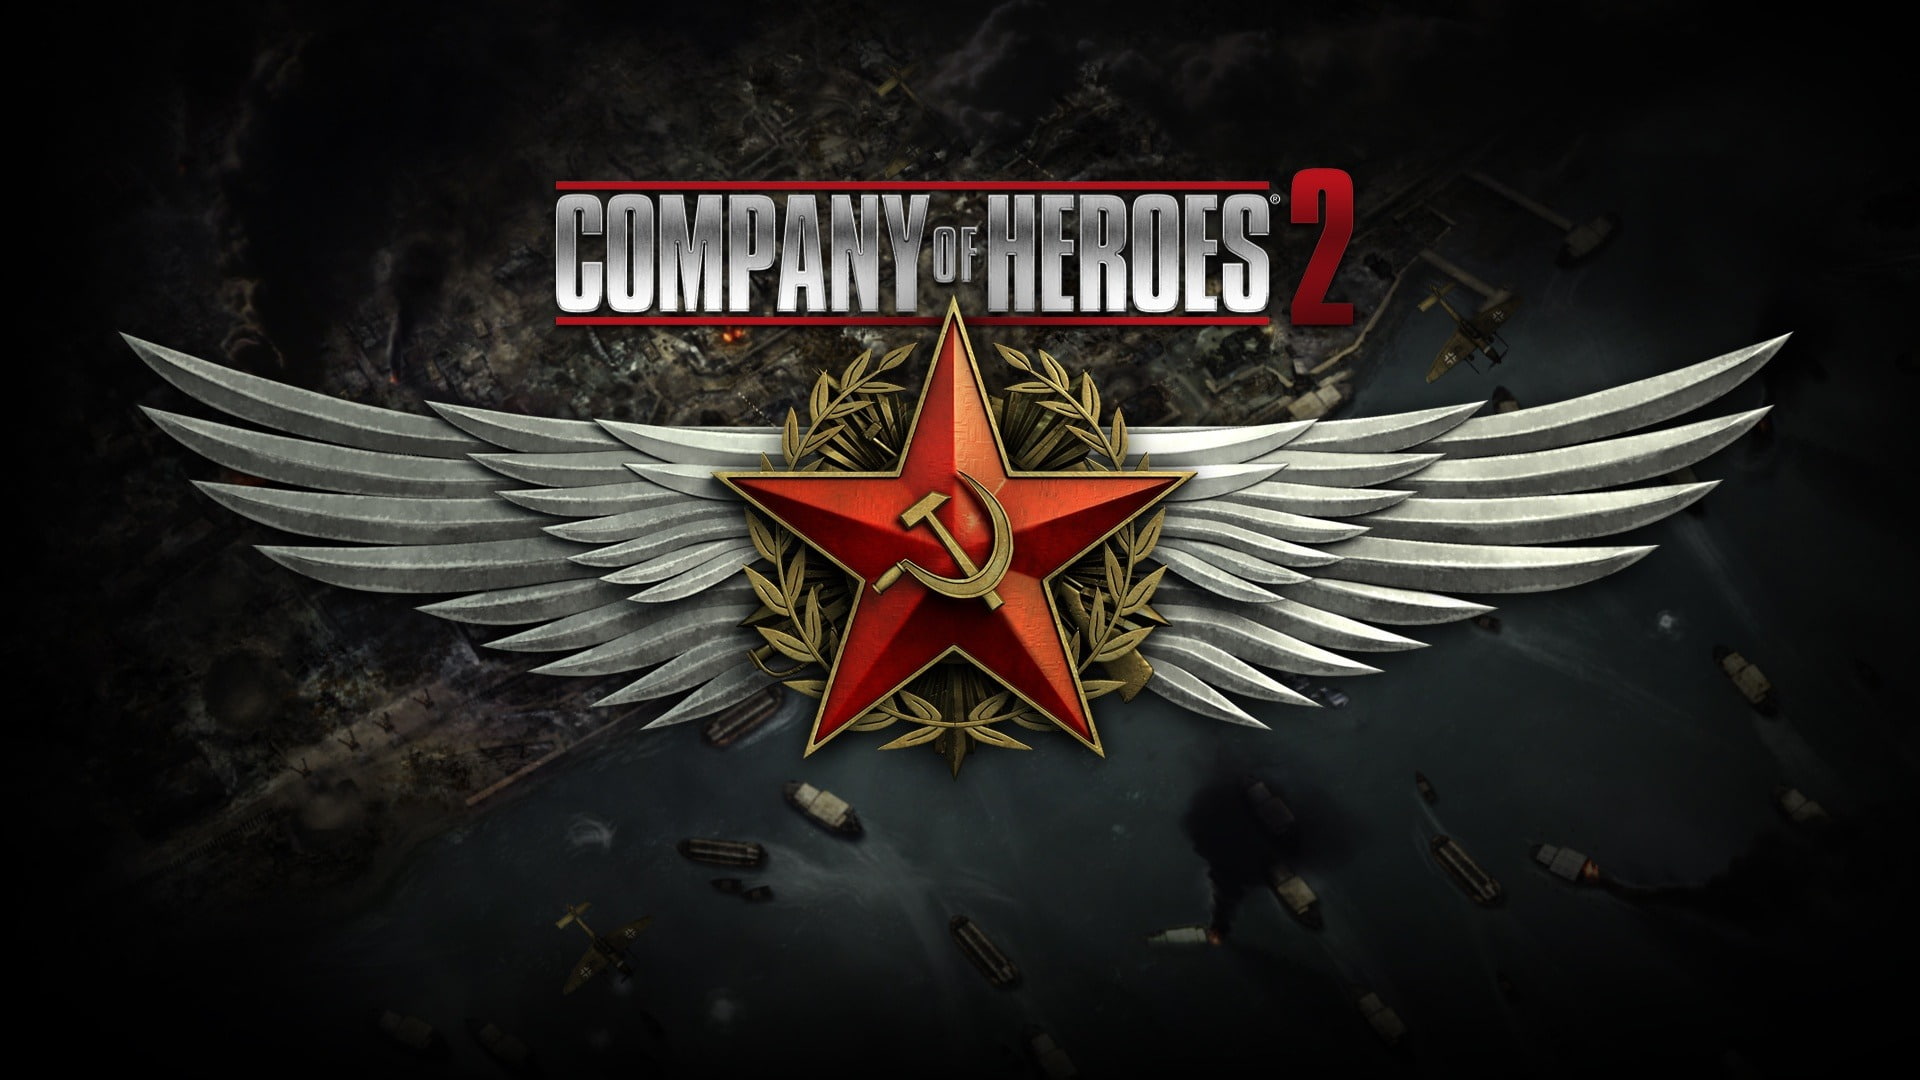 Company of Heroes-2013 Game HD Wallpaper, Company of Heroes 2 wallpaper